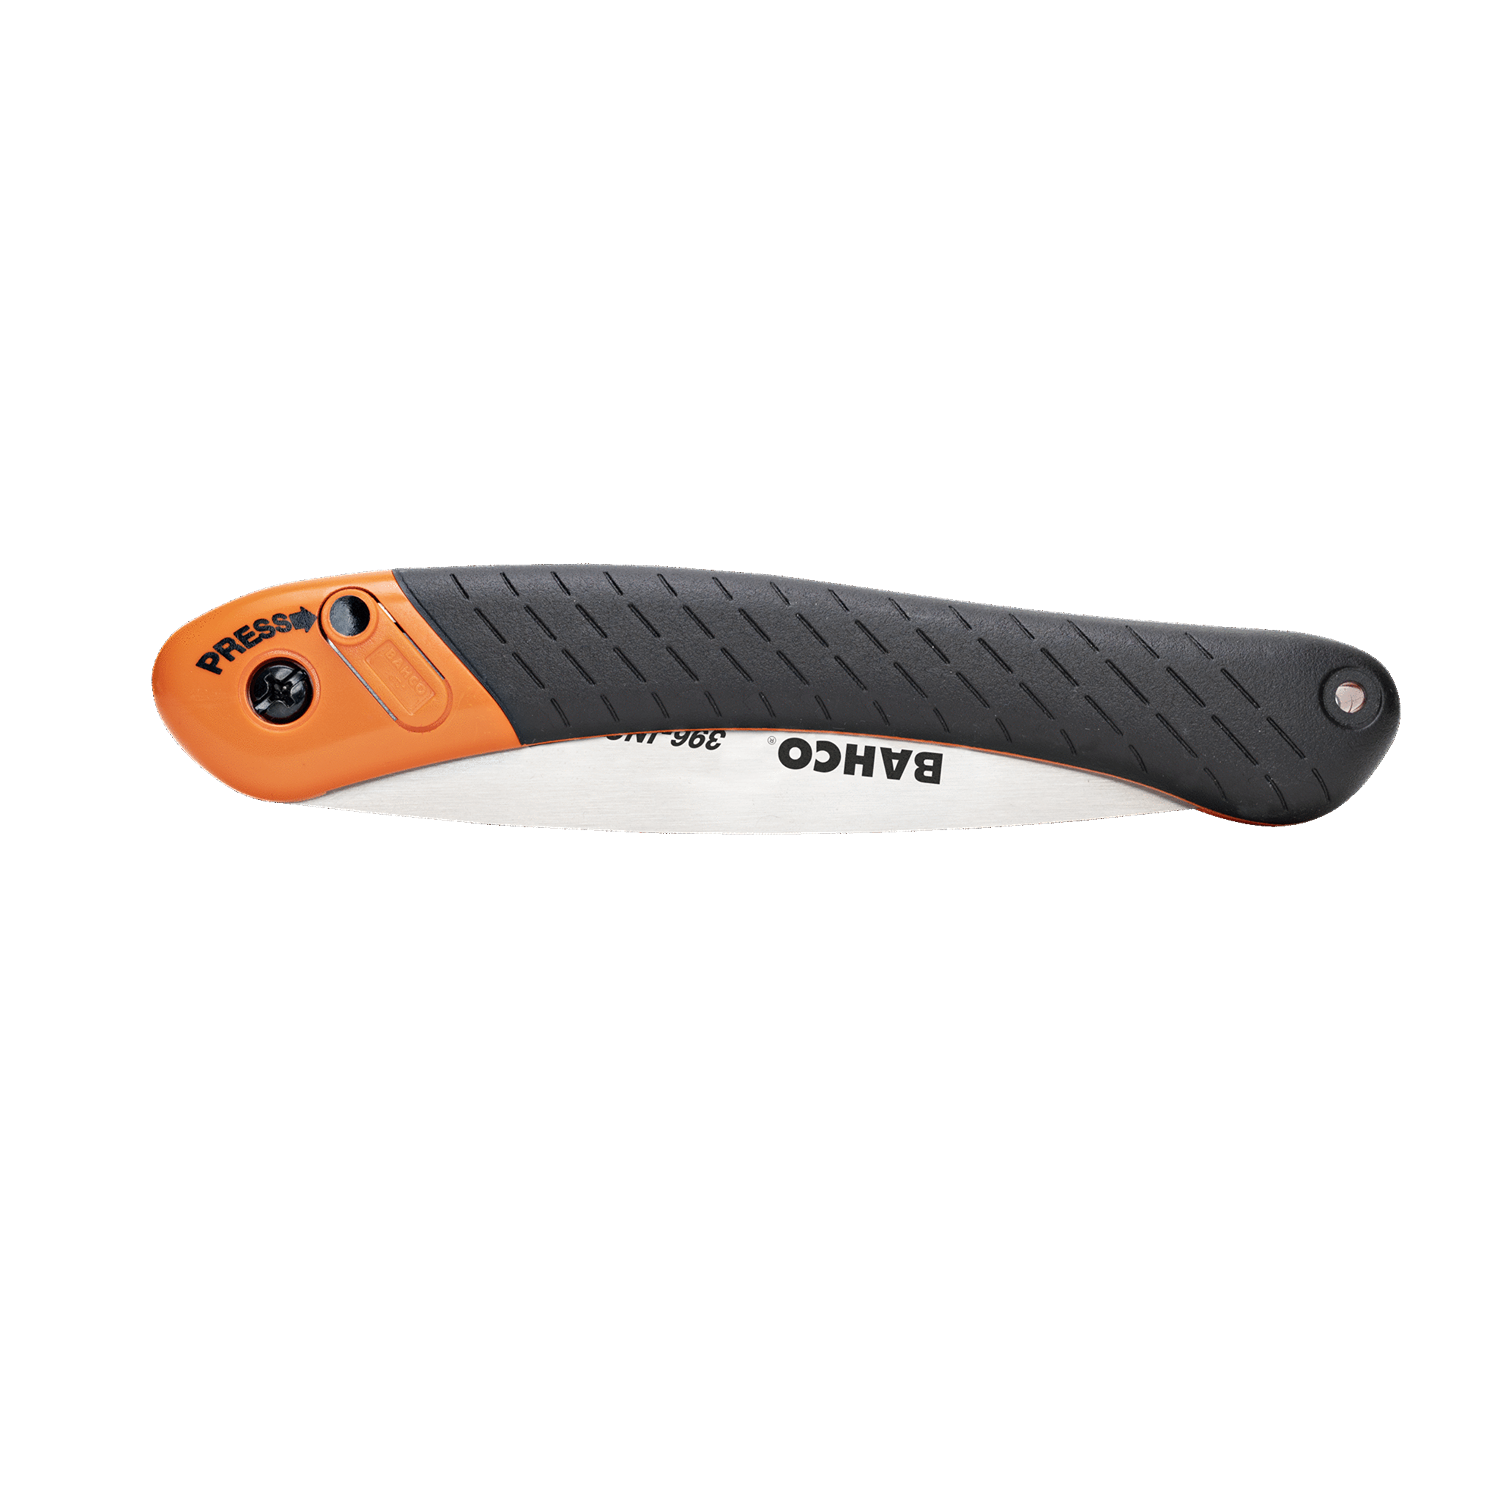 BAHCO 396-INS Folding saw specificaly for cutting Insulation Wool - Premium Folding Saw from BAHCO - Shop now at Yew Aik.